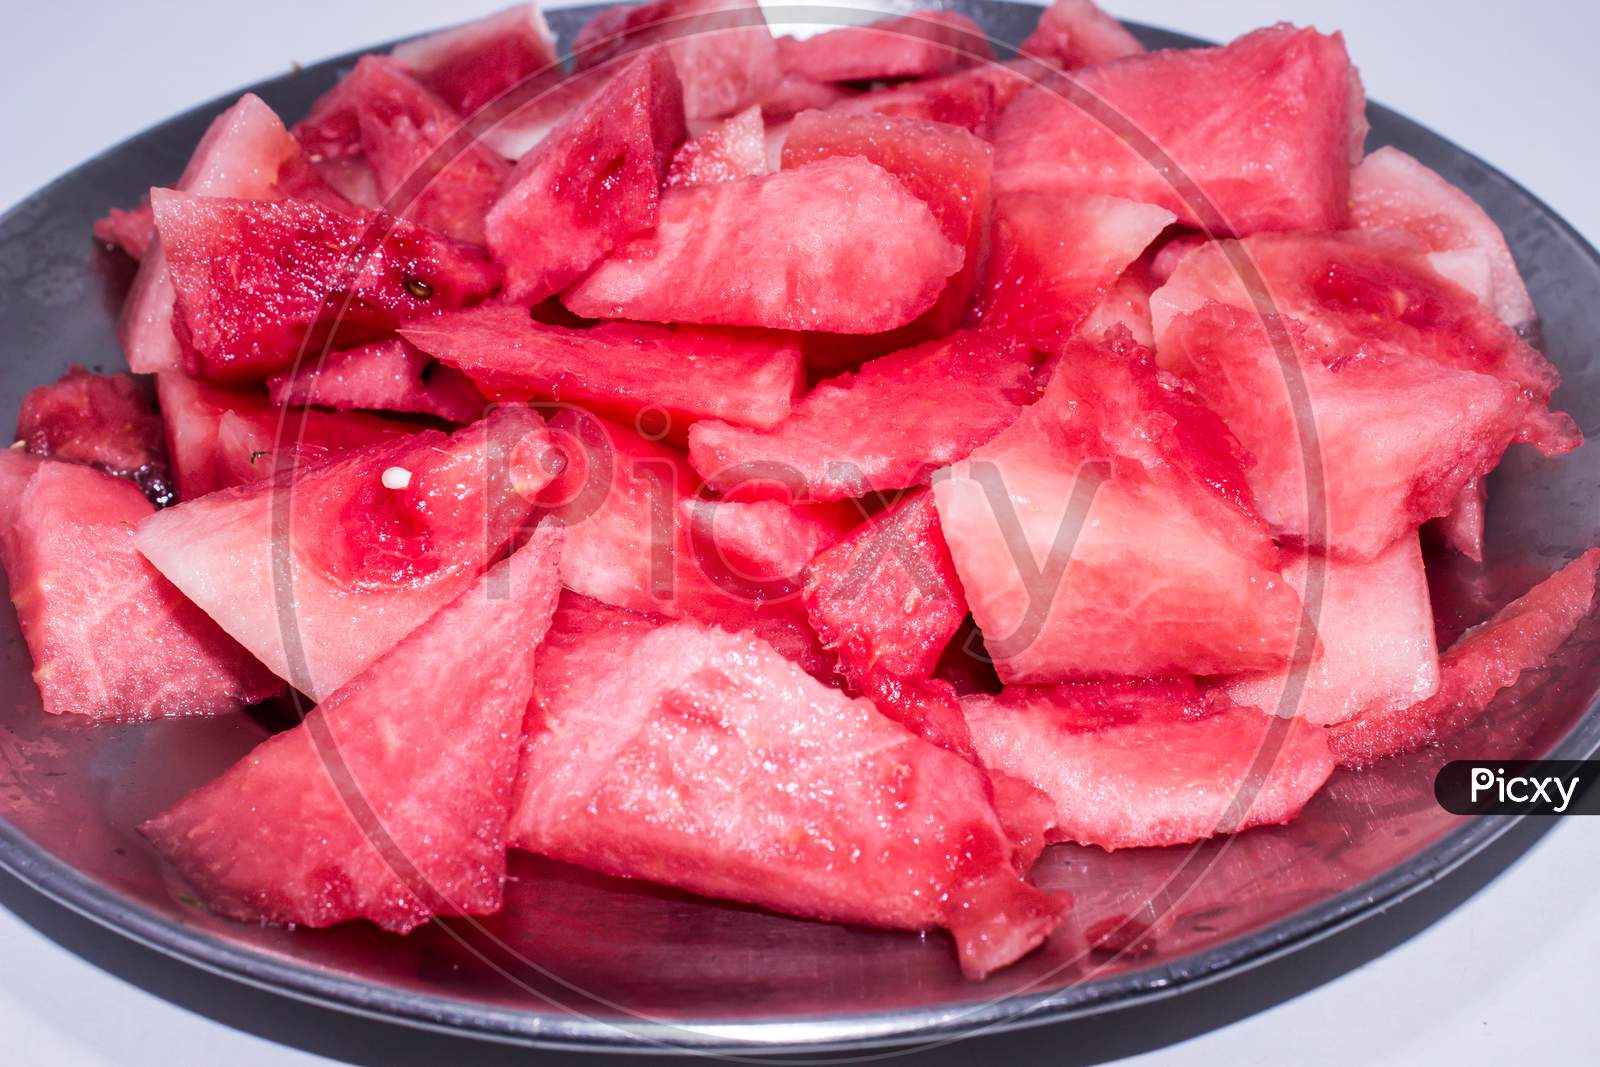 A picture of watermelon slices